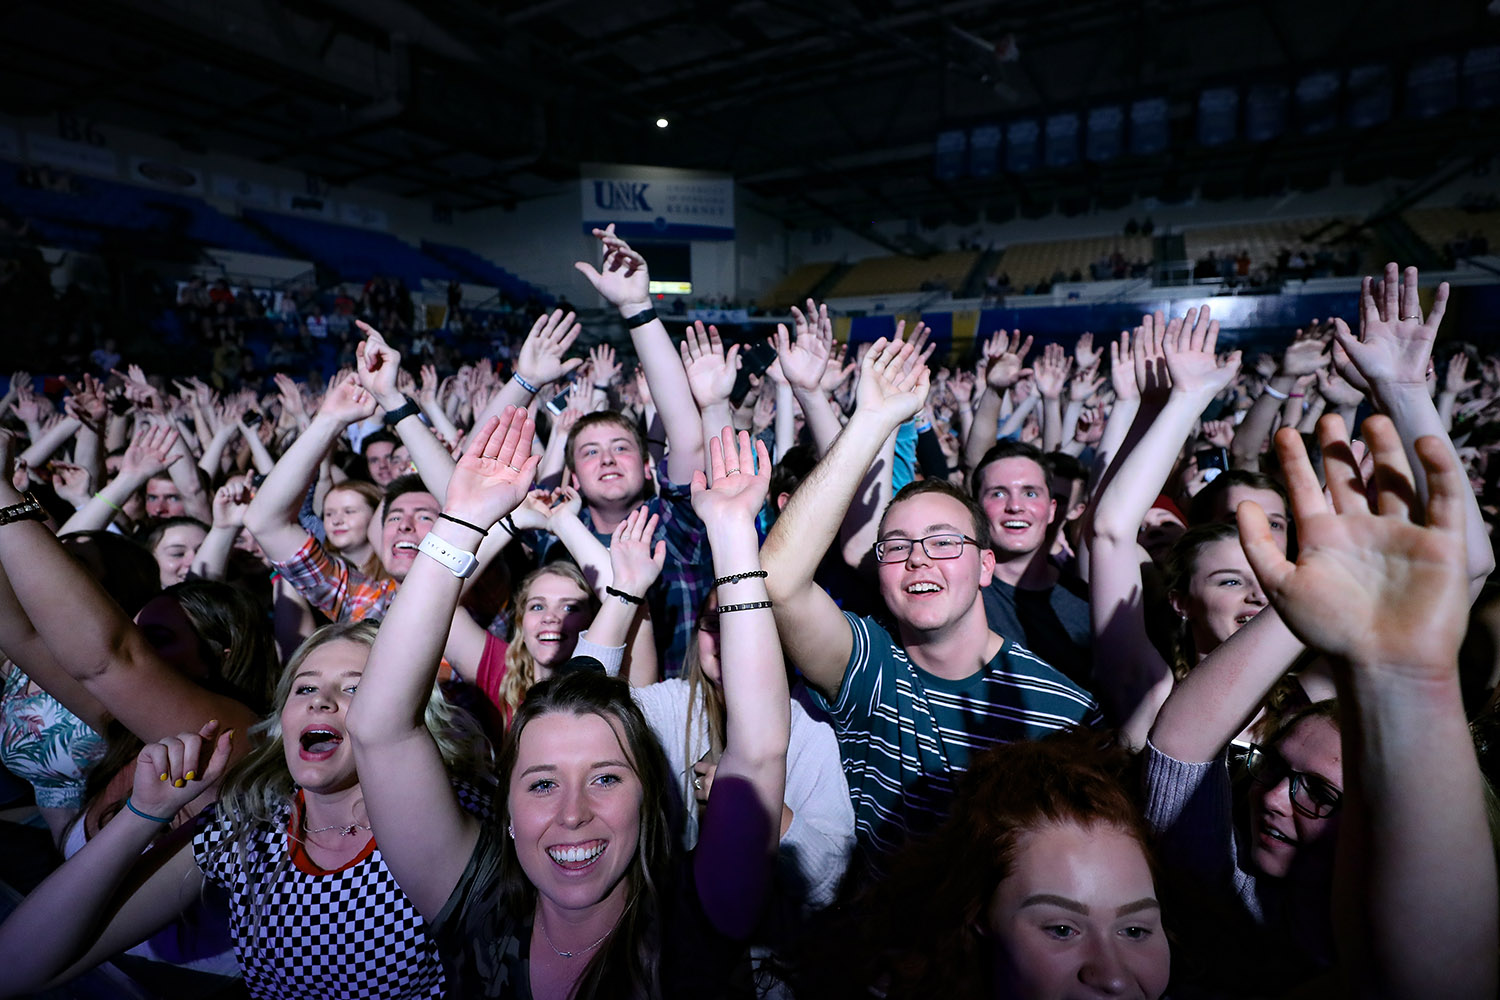 A large crowd attended the 2019 spring concert featuring AJR. This year's concert, featuring Yung Gravy, is scheduled for April 27 at the Health and Sports Center.